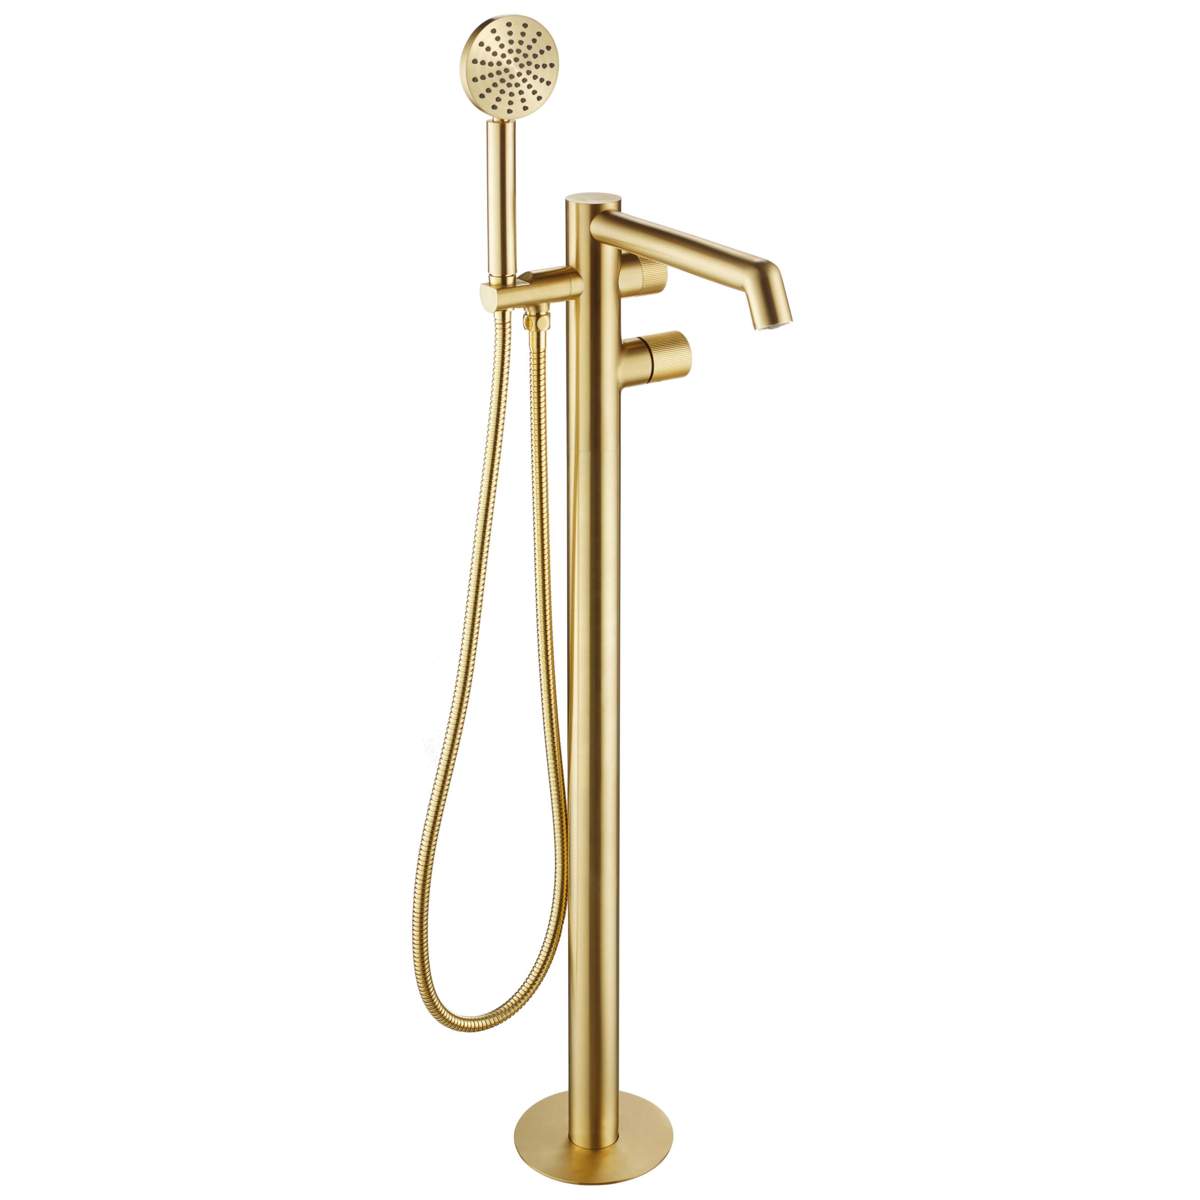 JTP Evo Brushed Brass Floor Standing Bath Shower Mixer with Kit but no Lever (63534BBR)